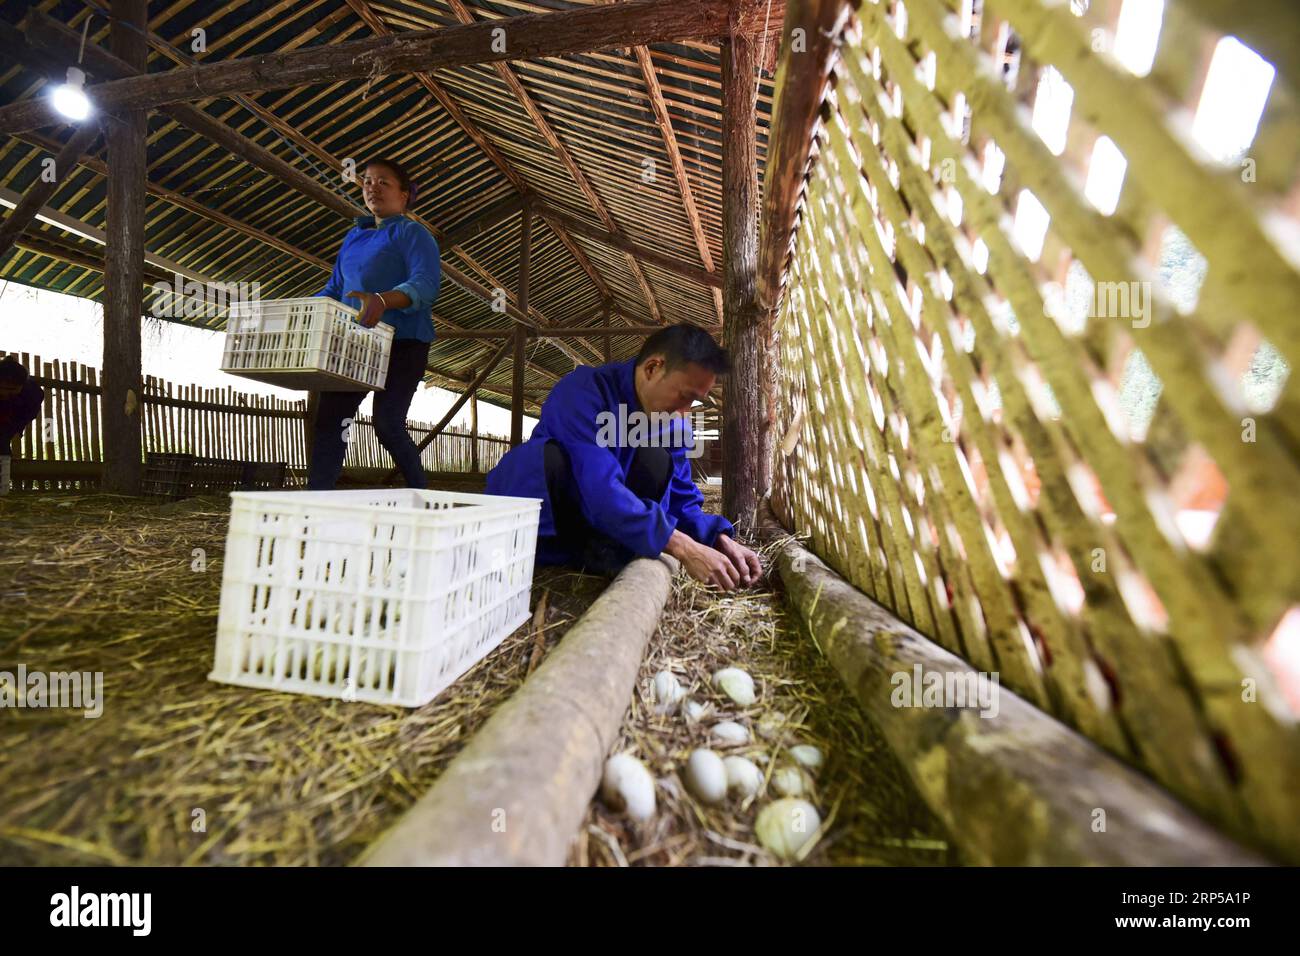 (181205) -- DANZHAI, Dec. 5, 2018 (Xinhua) -- Yang Zaiheng (R) collects duck eggs at an egg-laying duck farm in Dingdong Village of Danzhai County, Qiandongnan Miao and Dong Autonomous Prefecture, southwest China s Guizhou Province, Dec. 4, 2018. Duck farmer Yang Zaiheng, 42, was once impoverished. After getting rid of poverty in 2015 through livestock and fish farming, Yang decided to promote the breeding industry in local area and help other impoverished households increase income. In 2017, Yang and other six households set up an egg-laying duck breeding cooperative with a duck egg productio Stock Photo